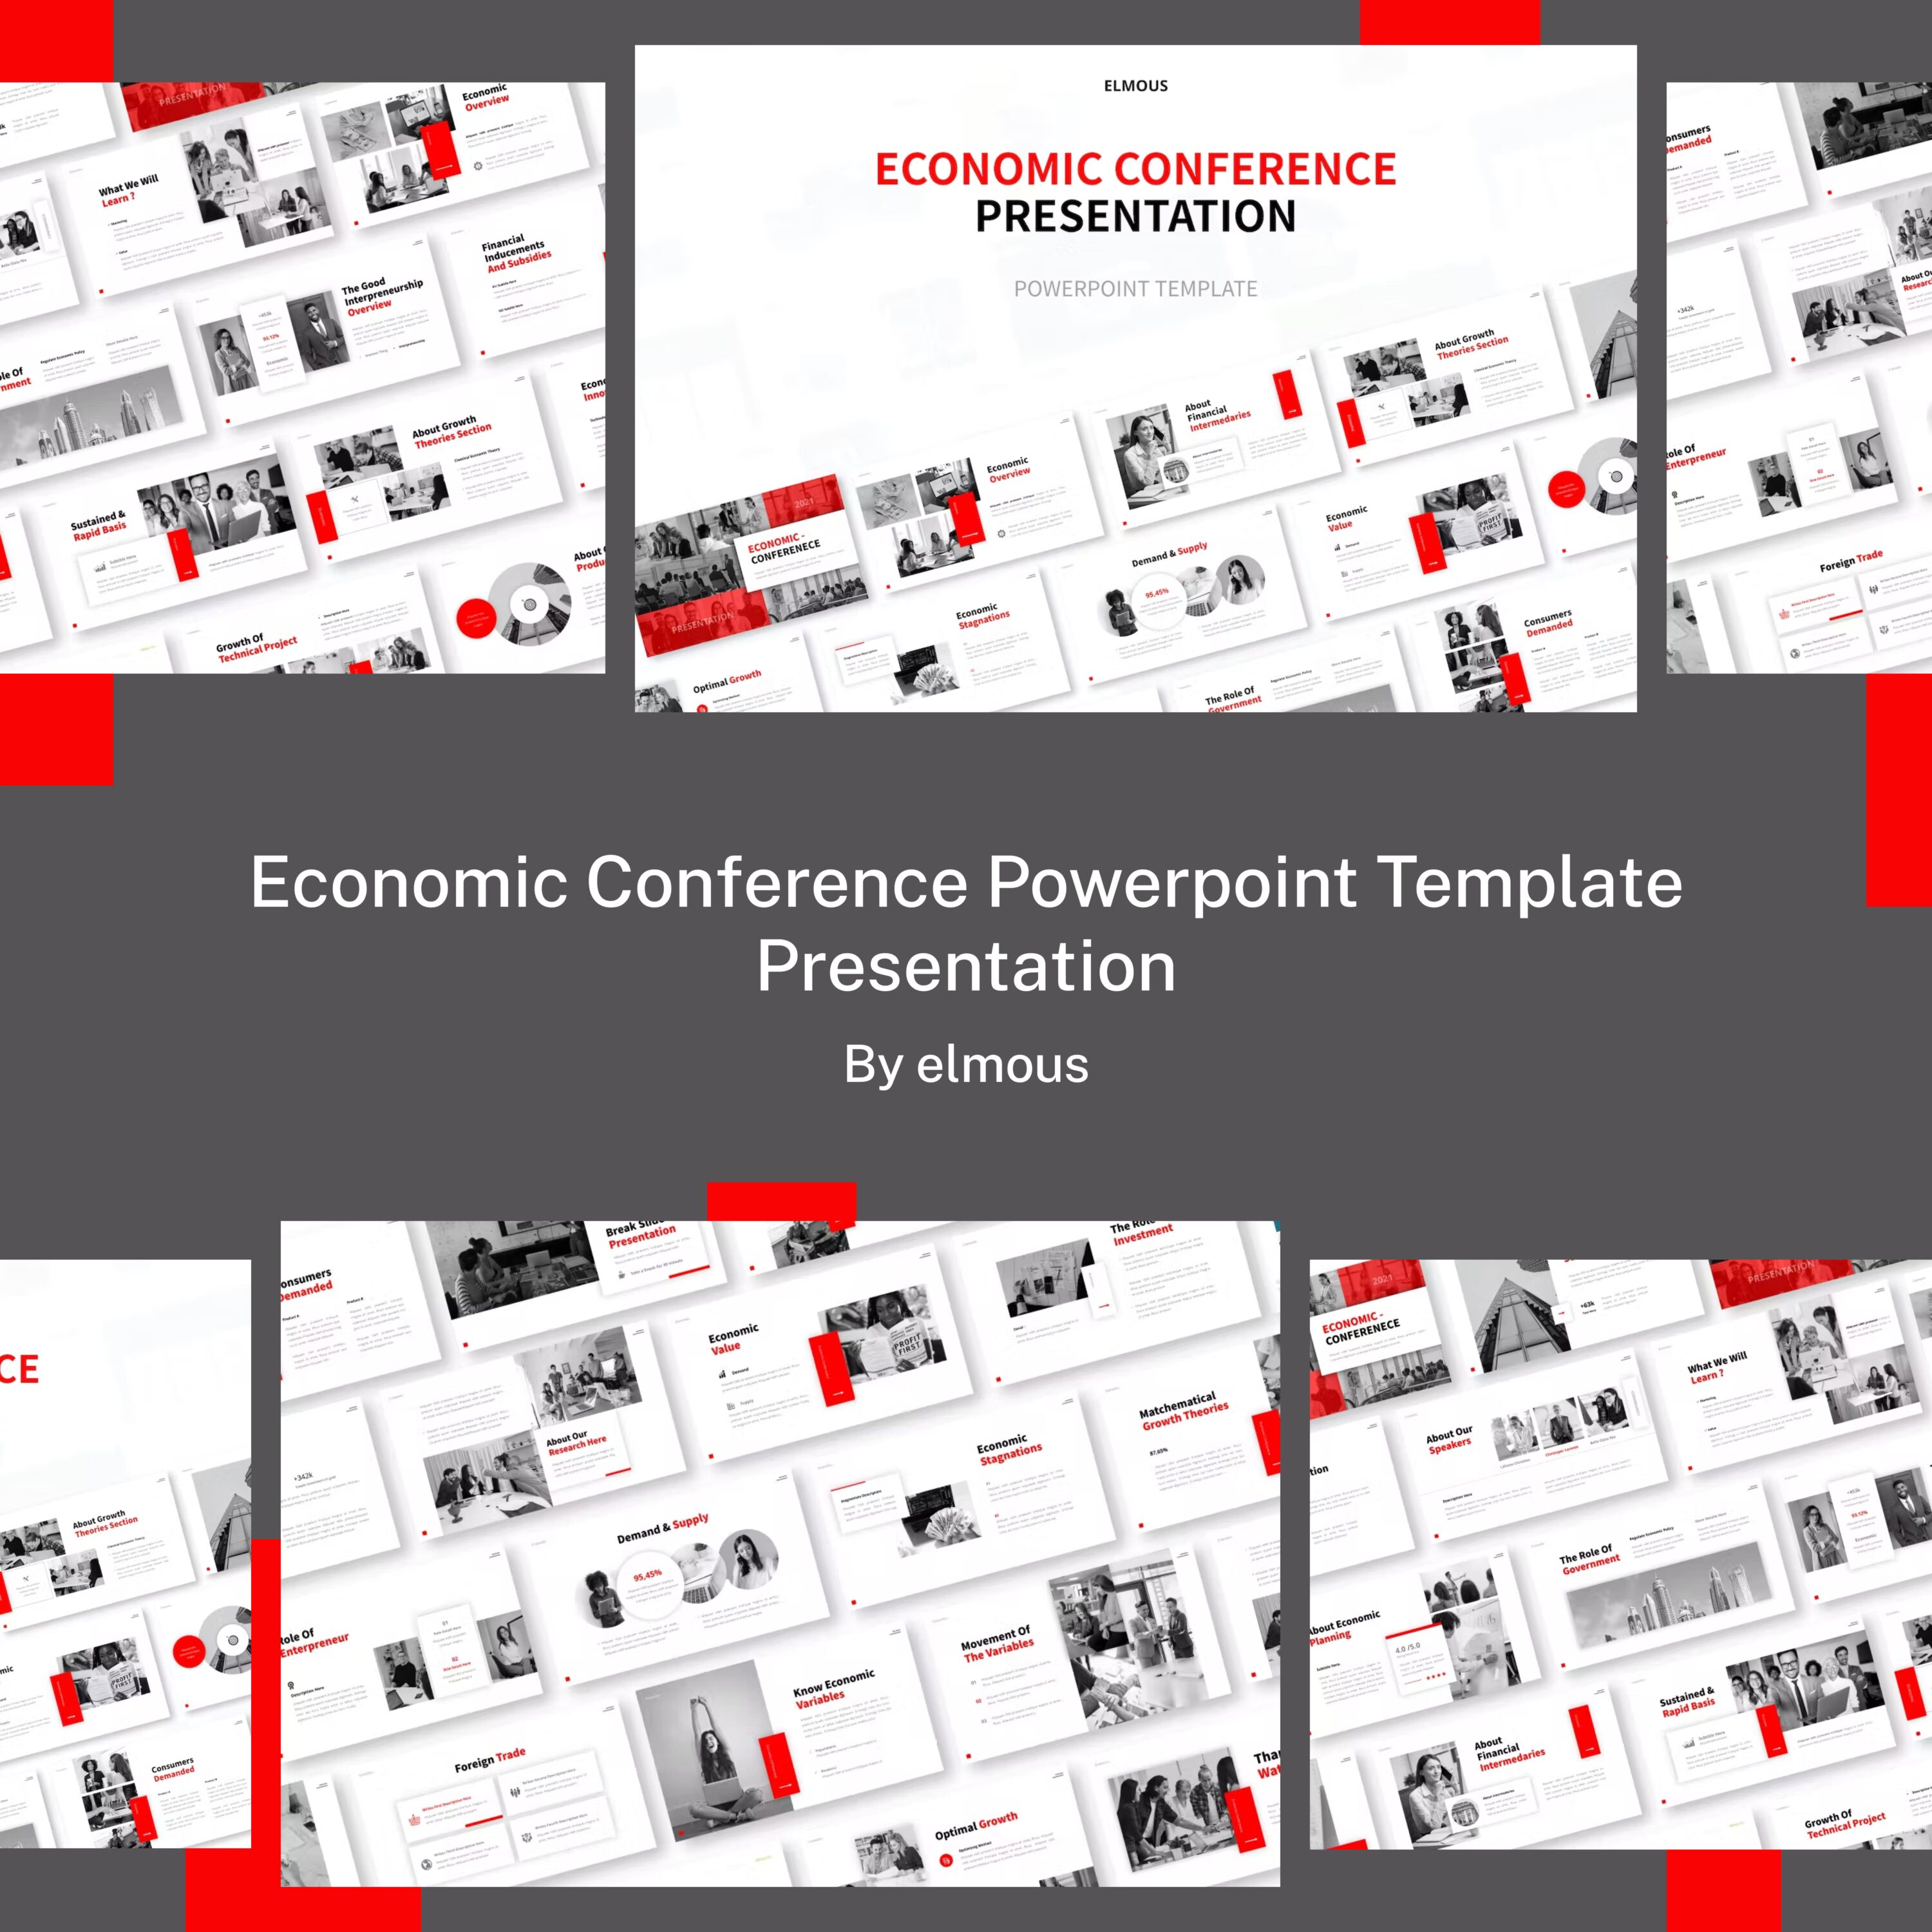 Preview images economic conference powerpoint template presentation.